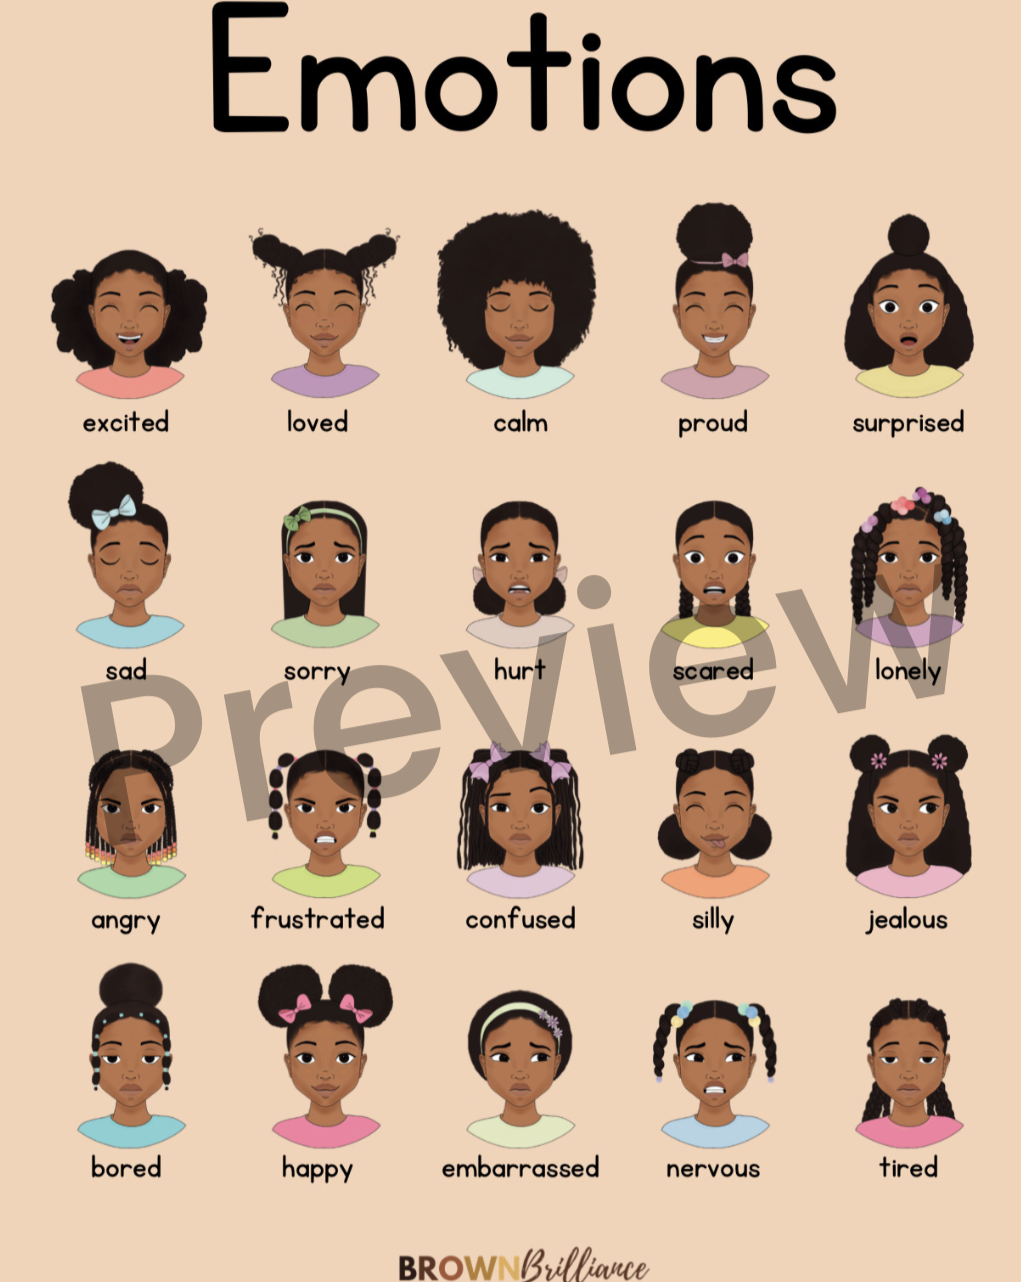 Her Emotions Poster